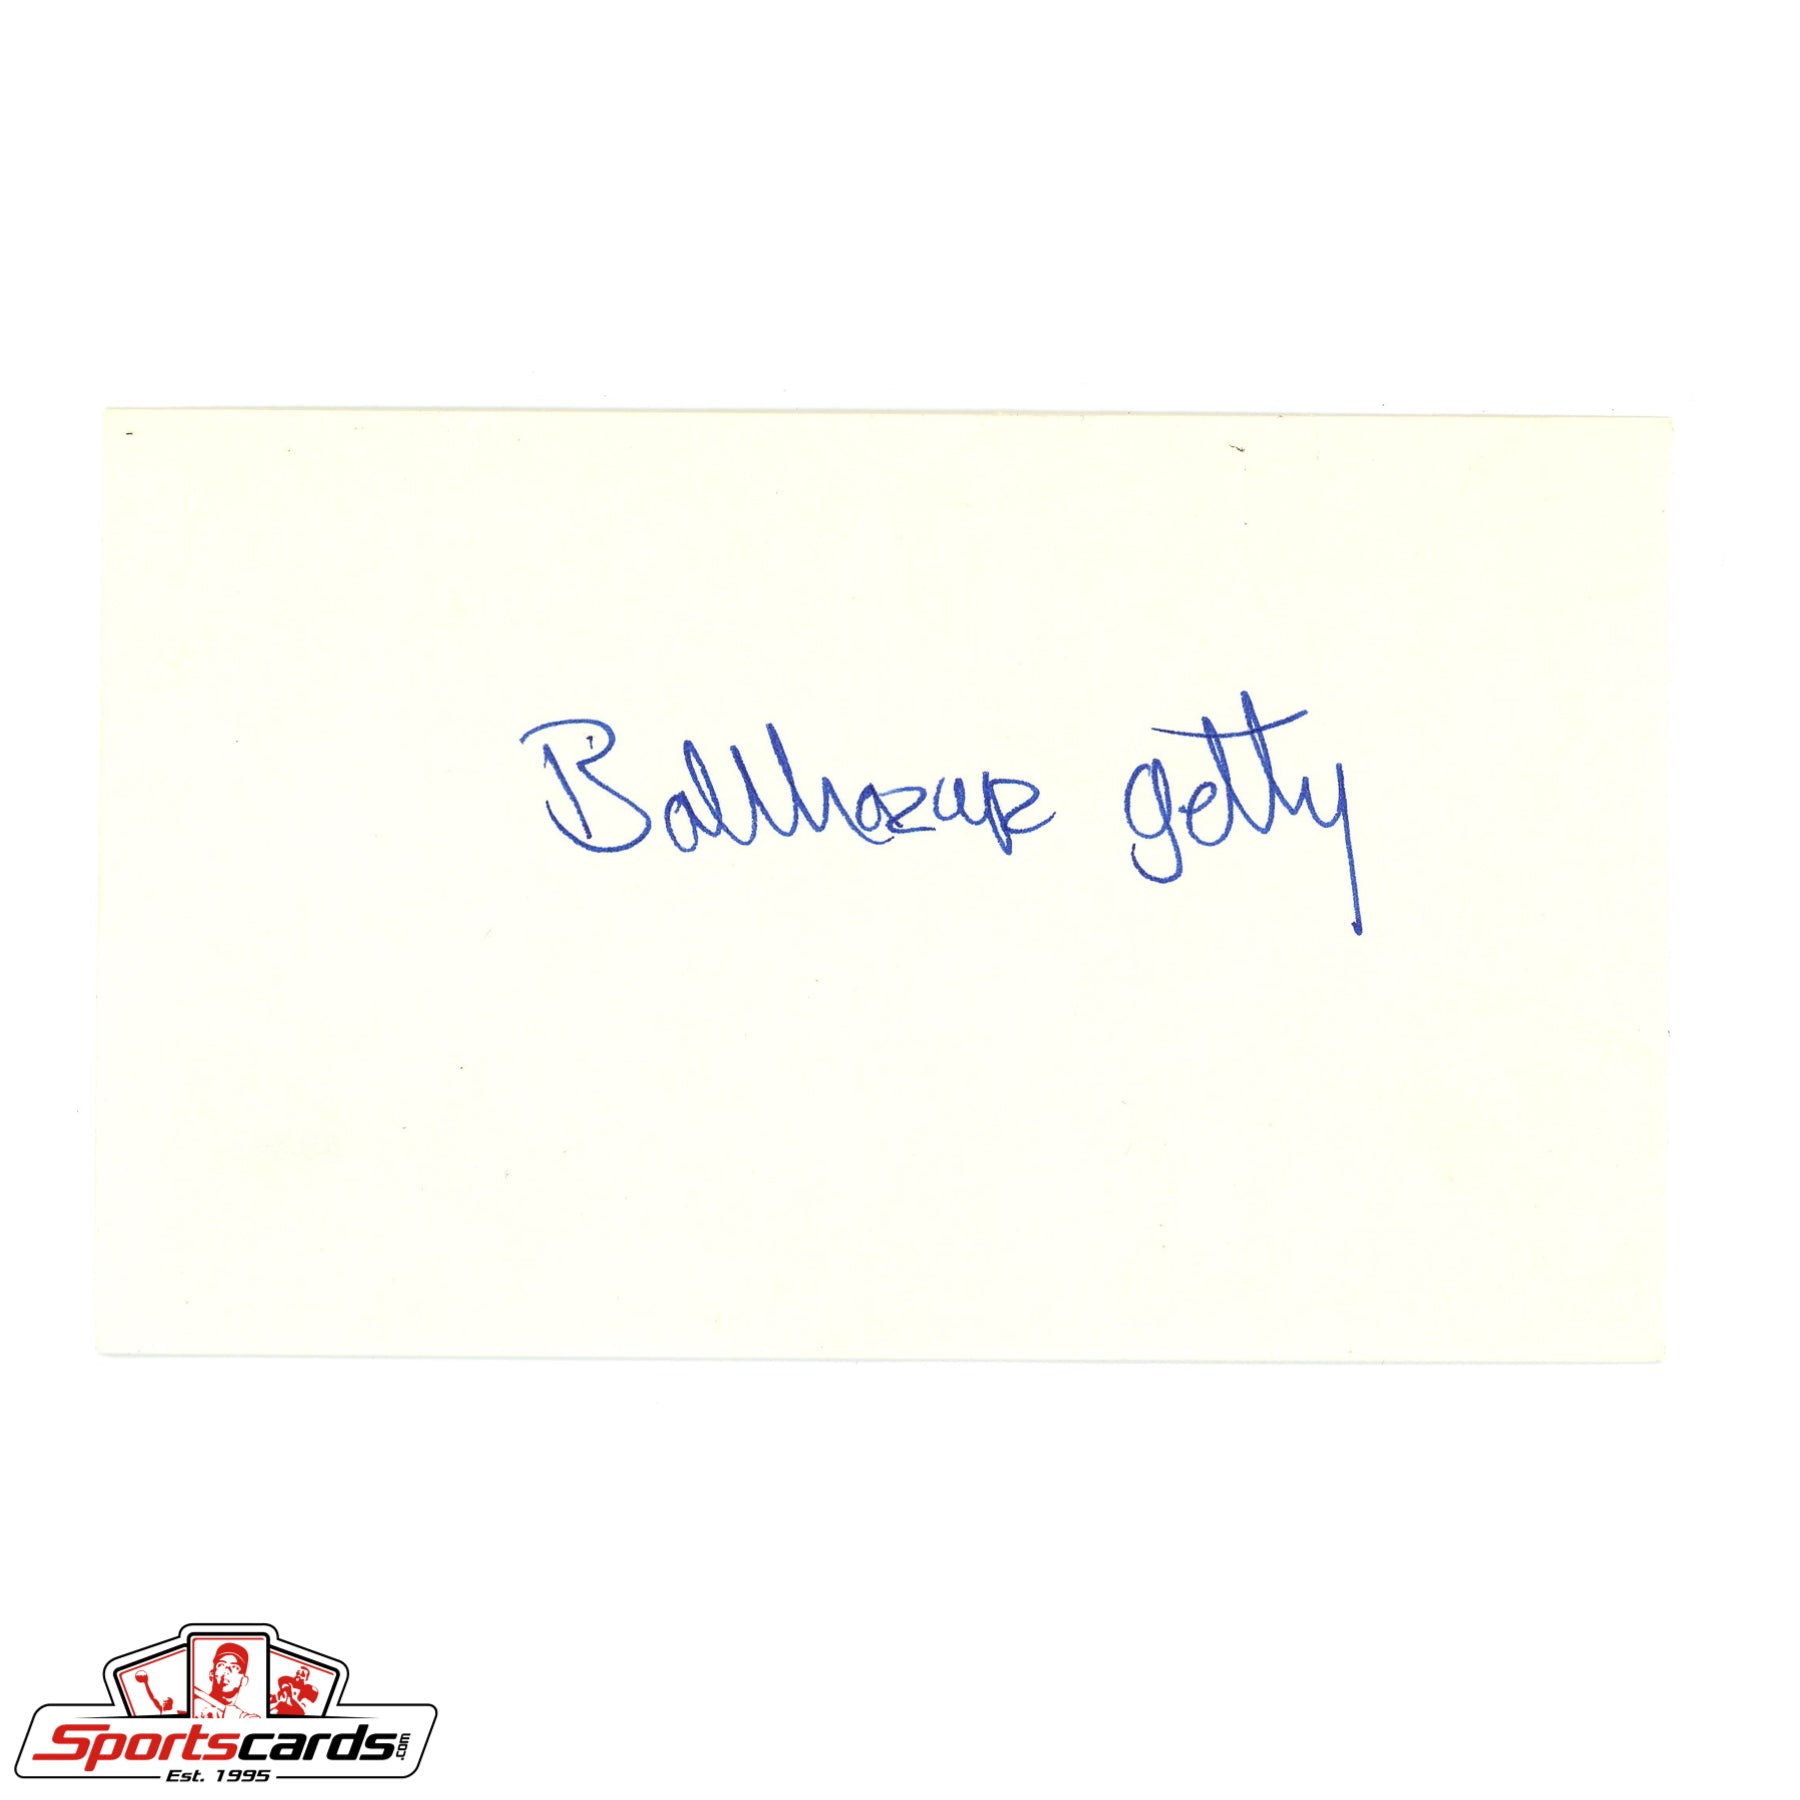 Actor Balthazar Getty Signed Auto 3x5 Index Card Beckett BAS Authentic